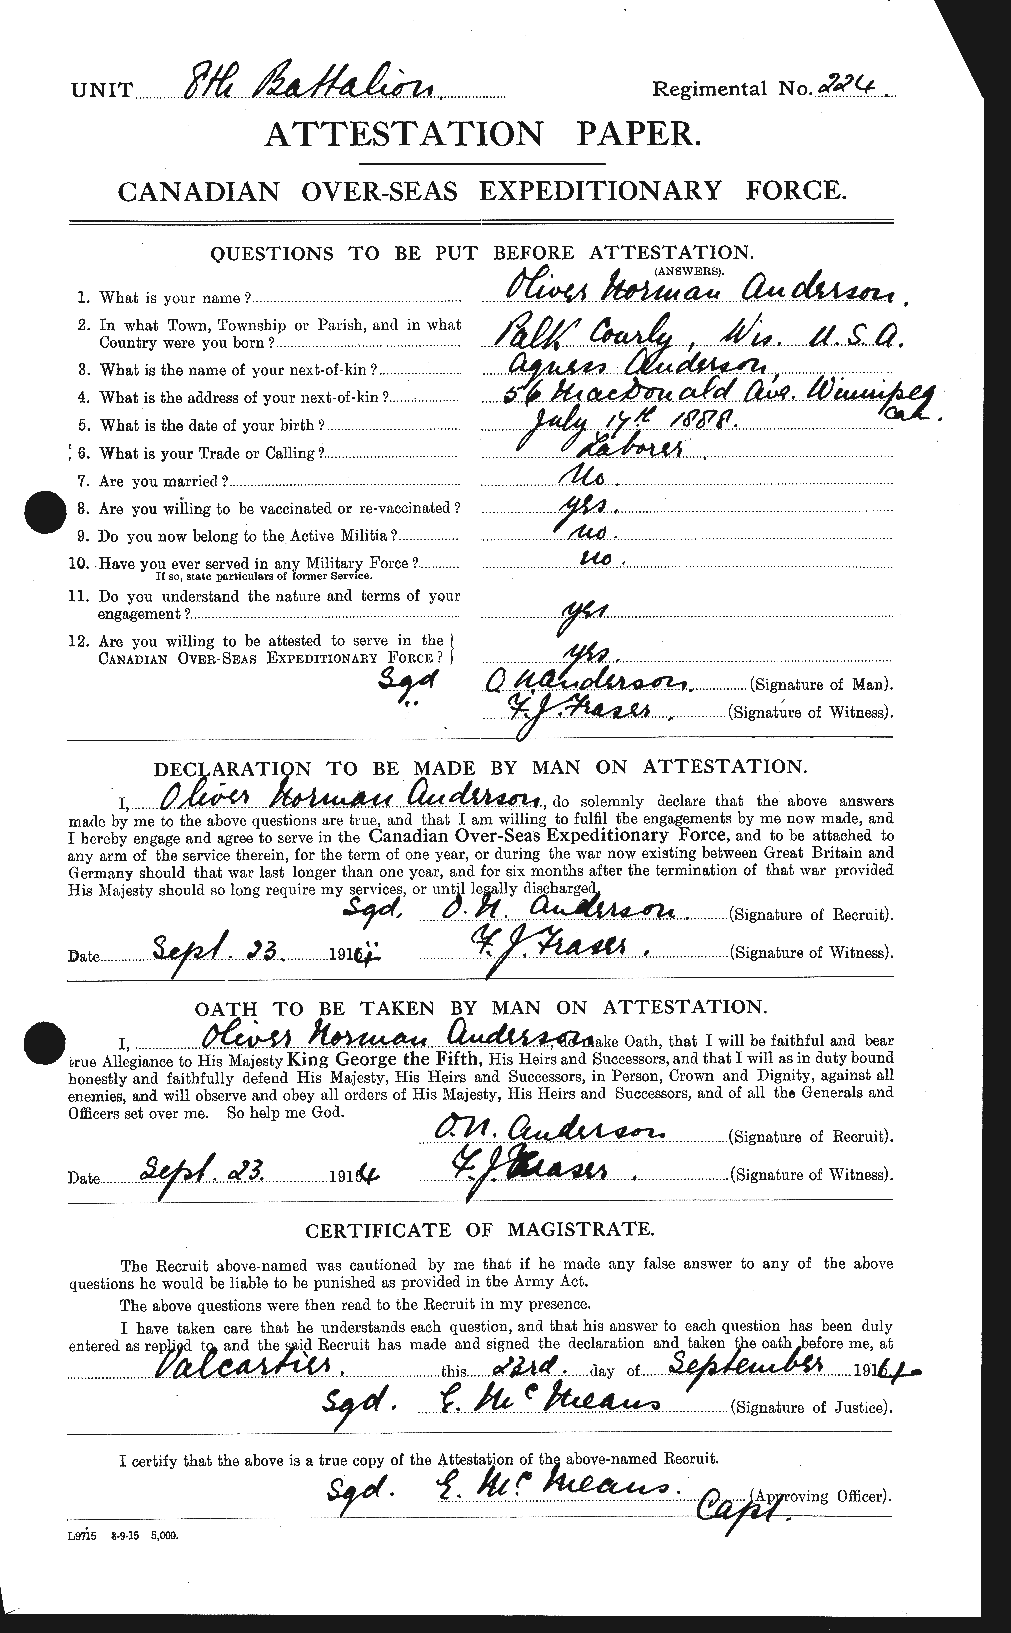 Personnel Records of the First World War - CEF 207394a